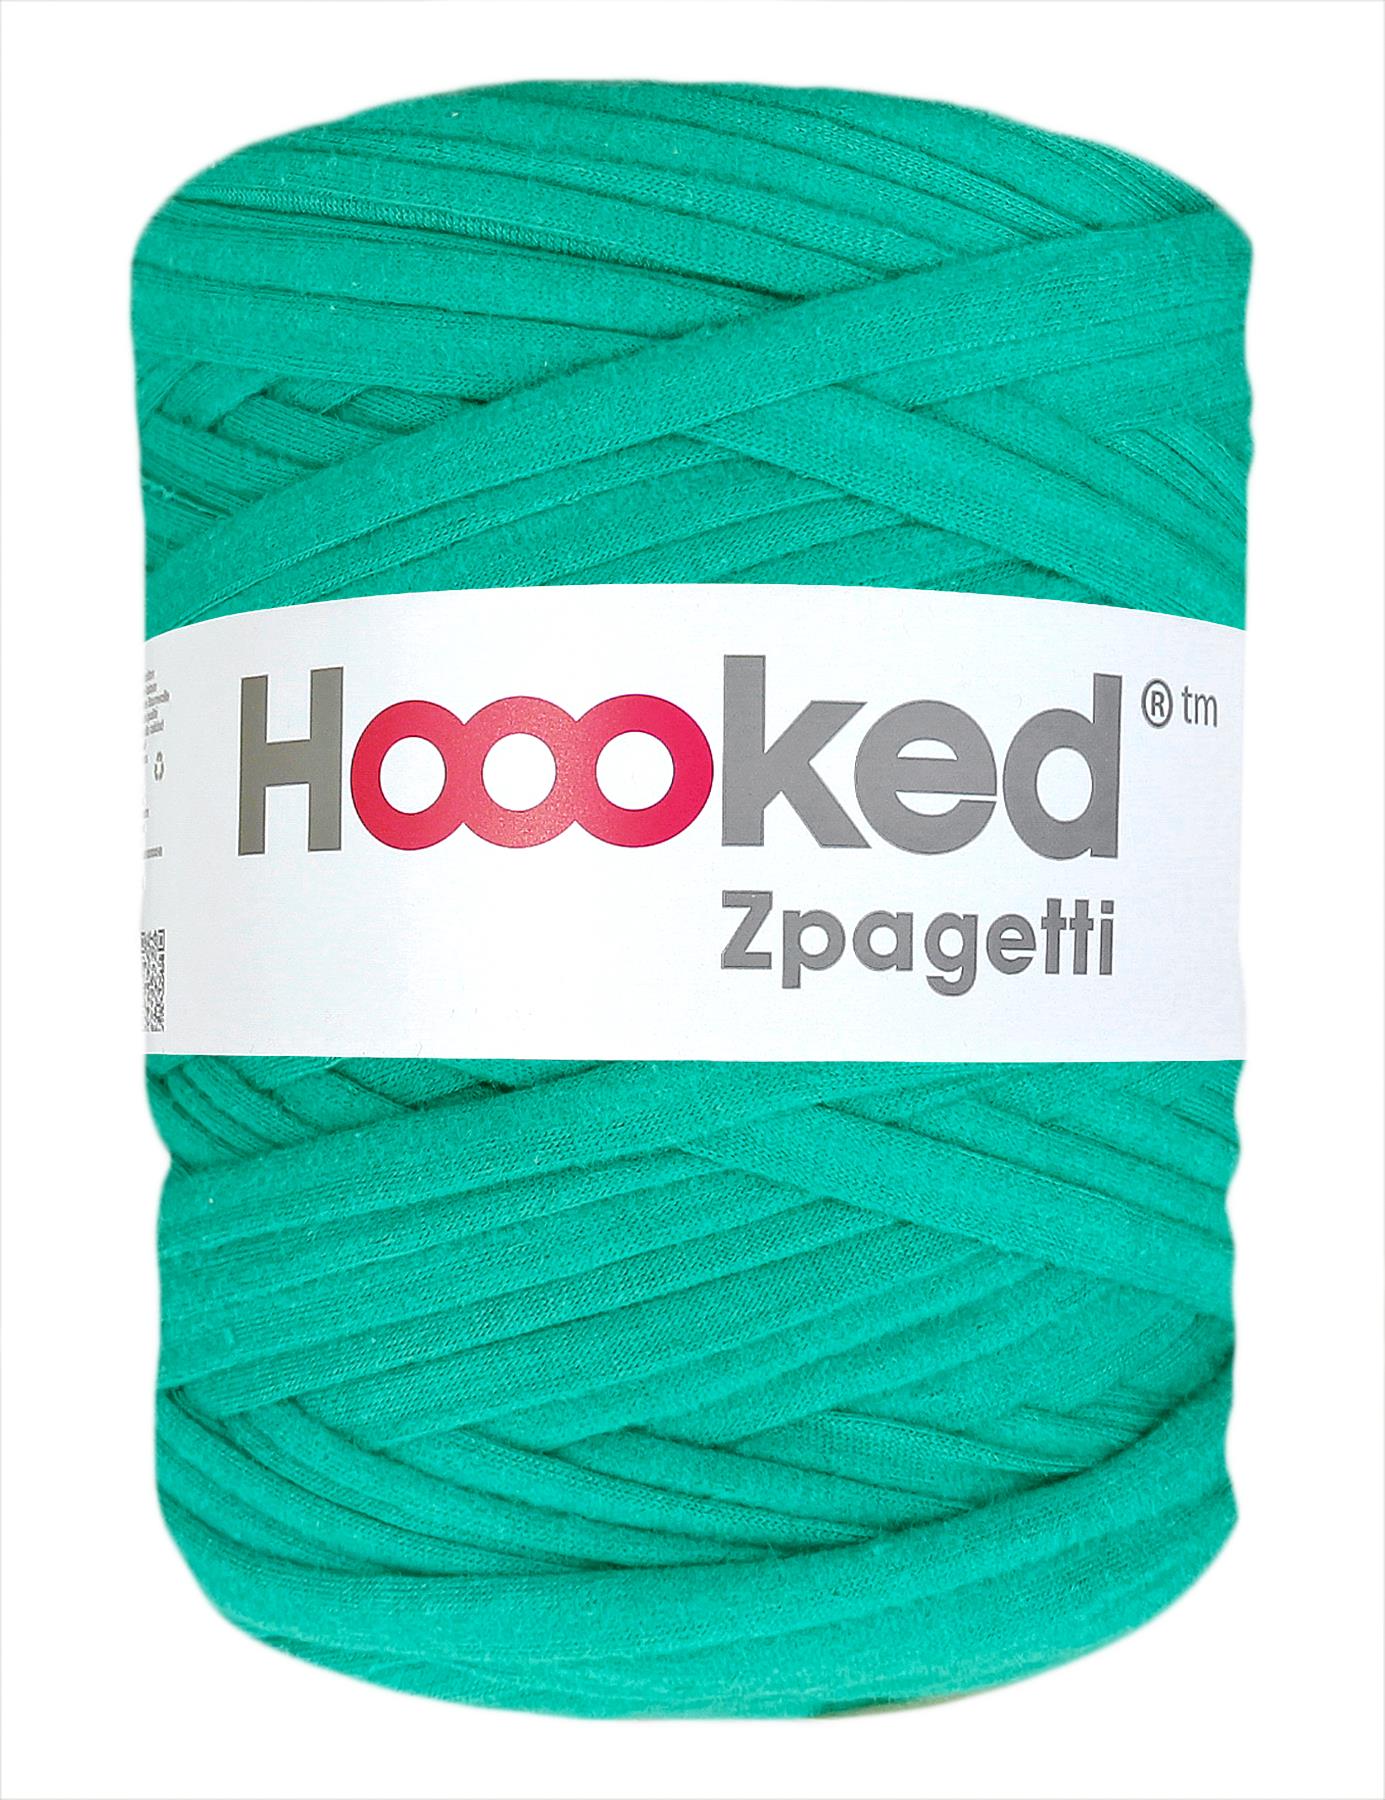 Muted turquoise t-shirt yarn by Hoooked Zpagetti (100-120m)